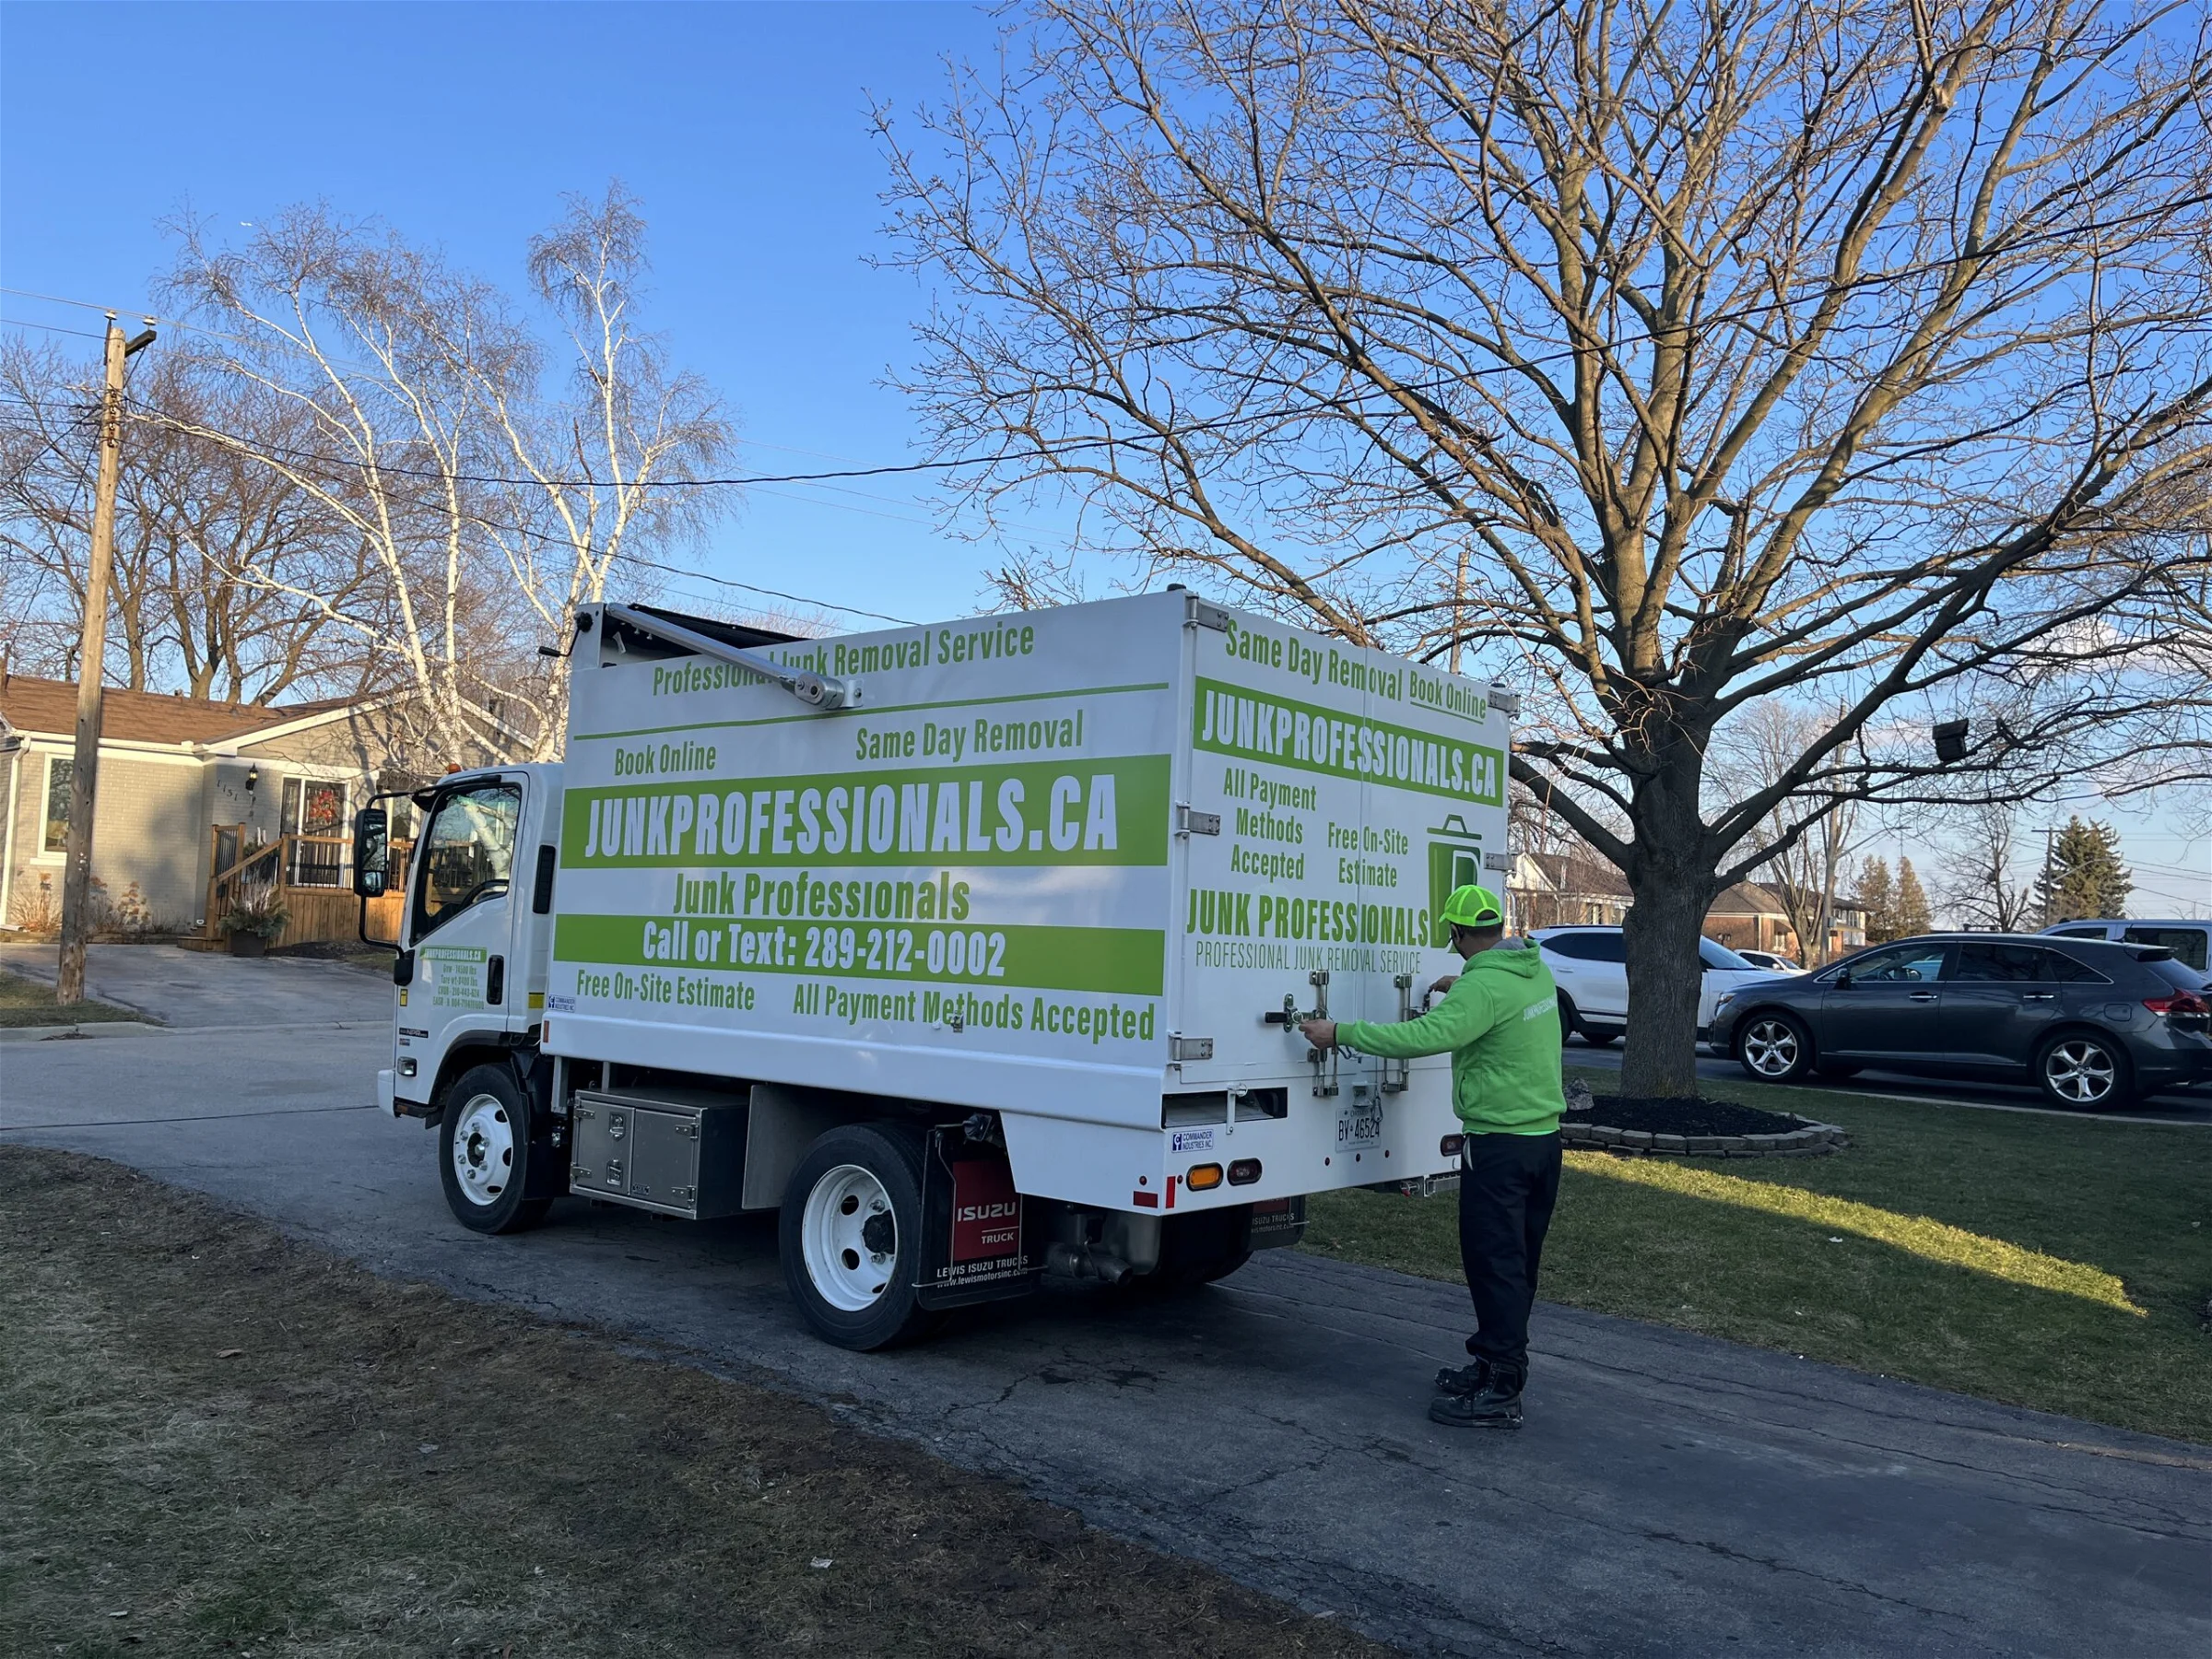 Junk professionals employee is opening a truck to provide Concrete Demolition & Removal